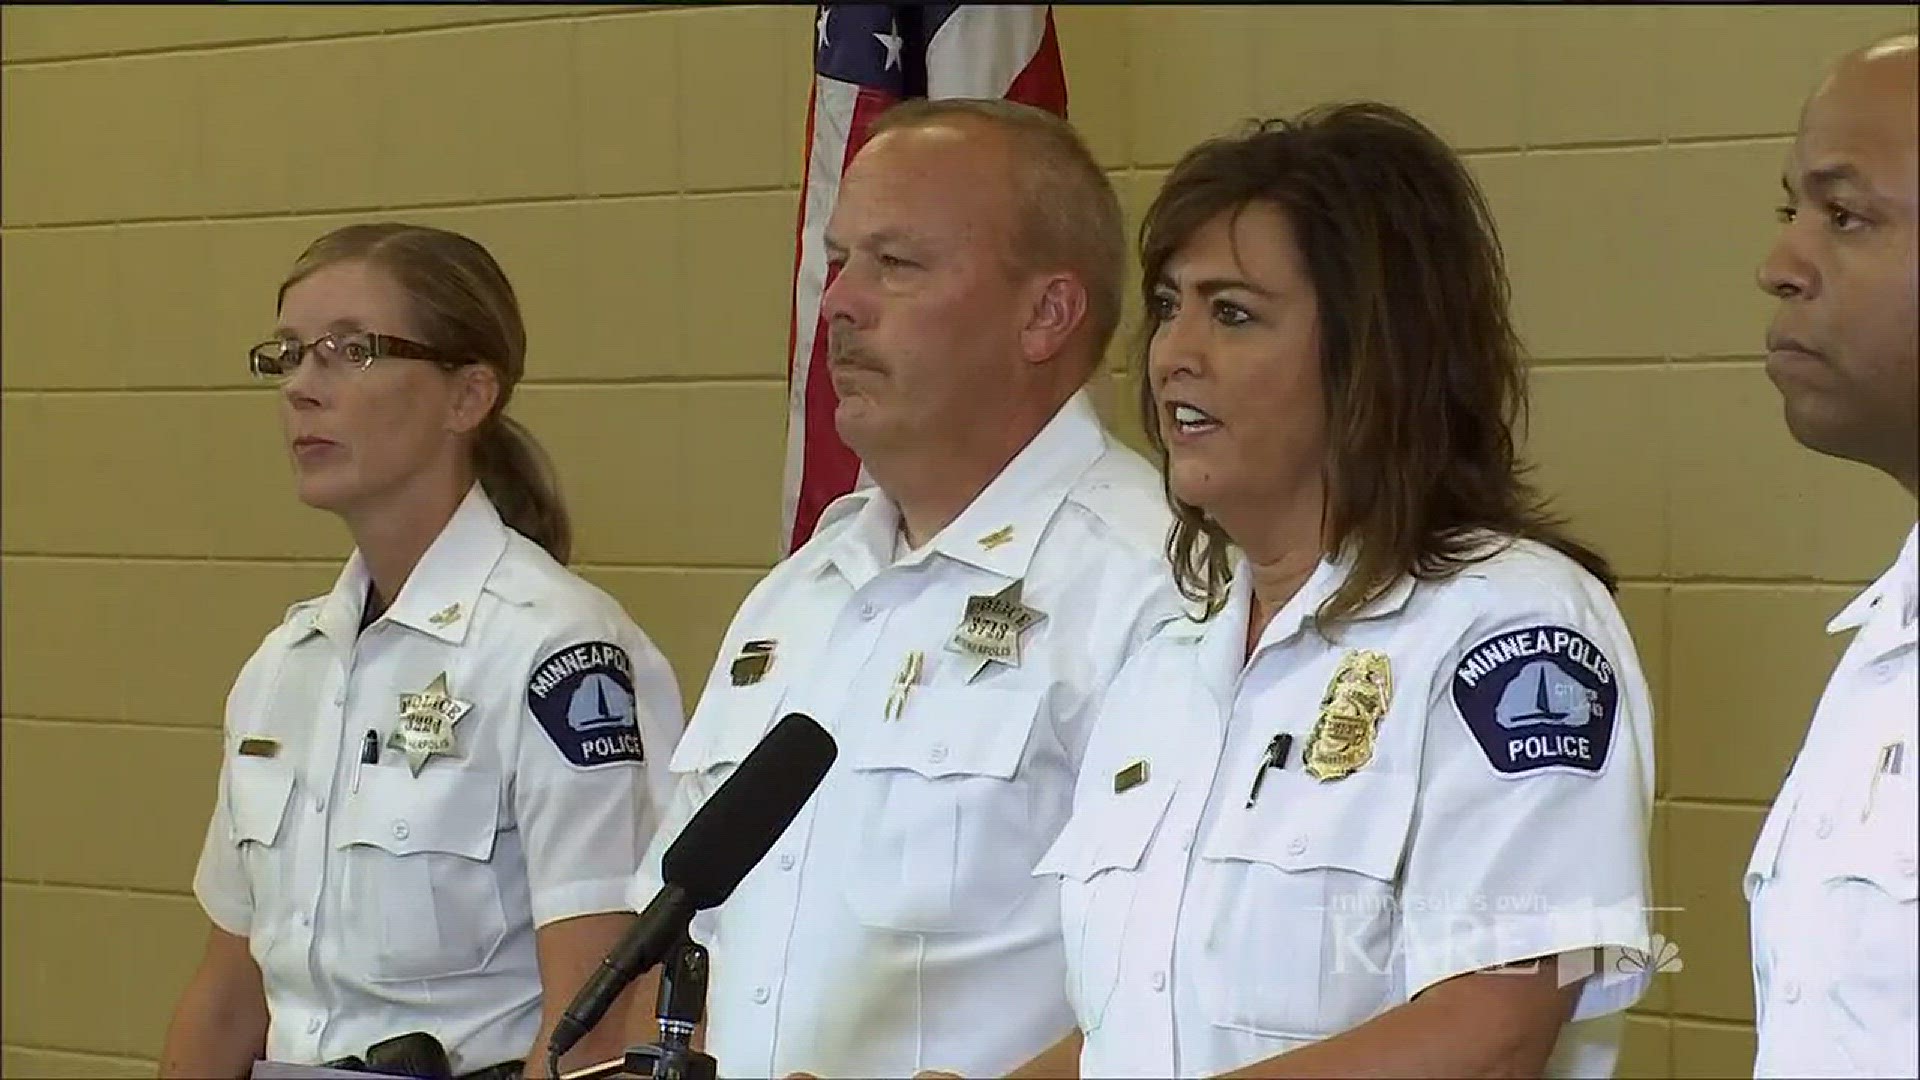 BTN: Minneapolis Police Chief Janee Harteau is out